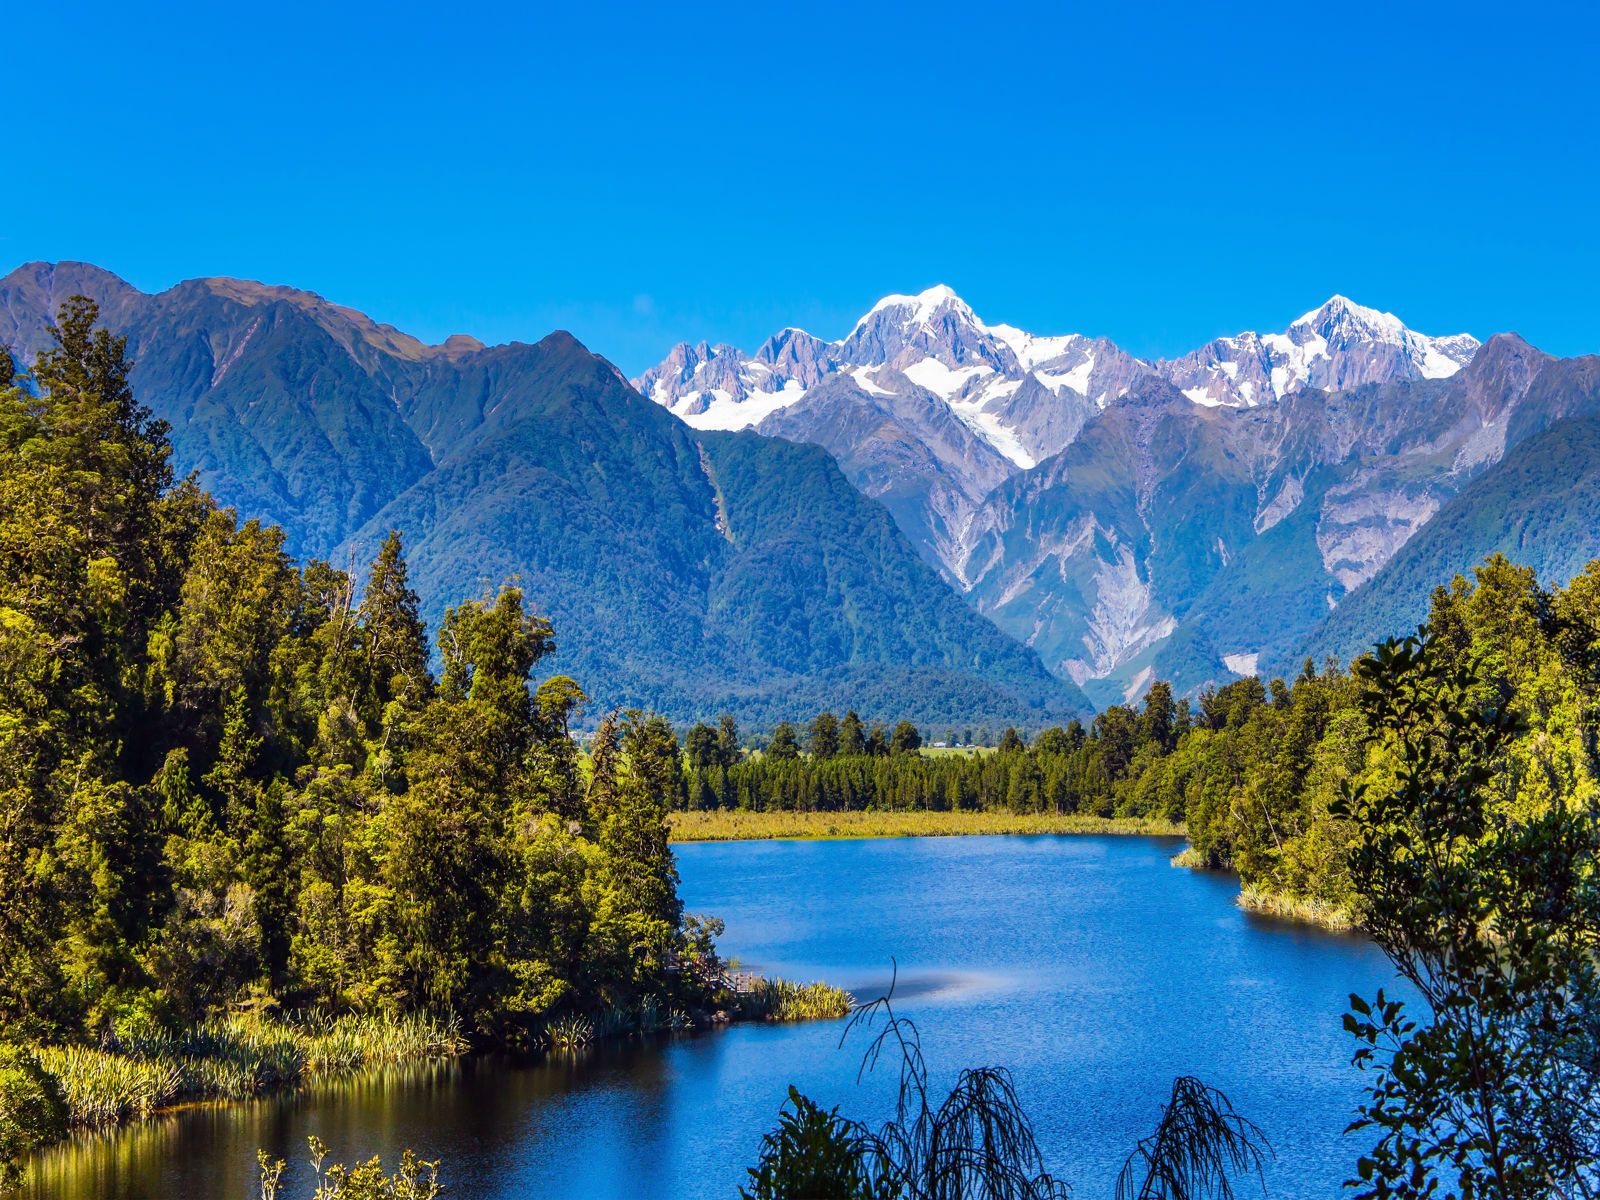 River through forest in New Zealand with white mountain peaks in the background